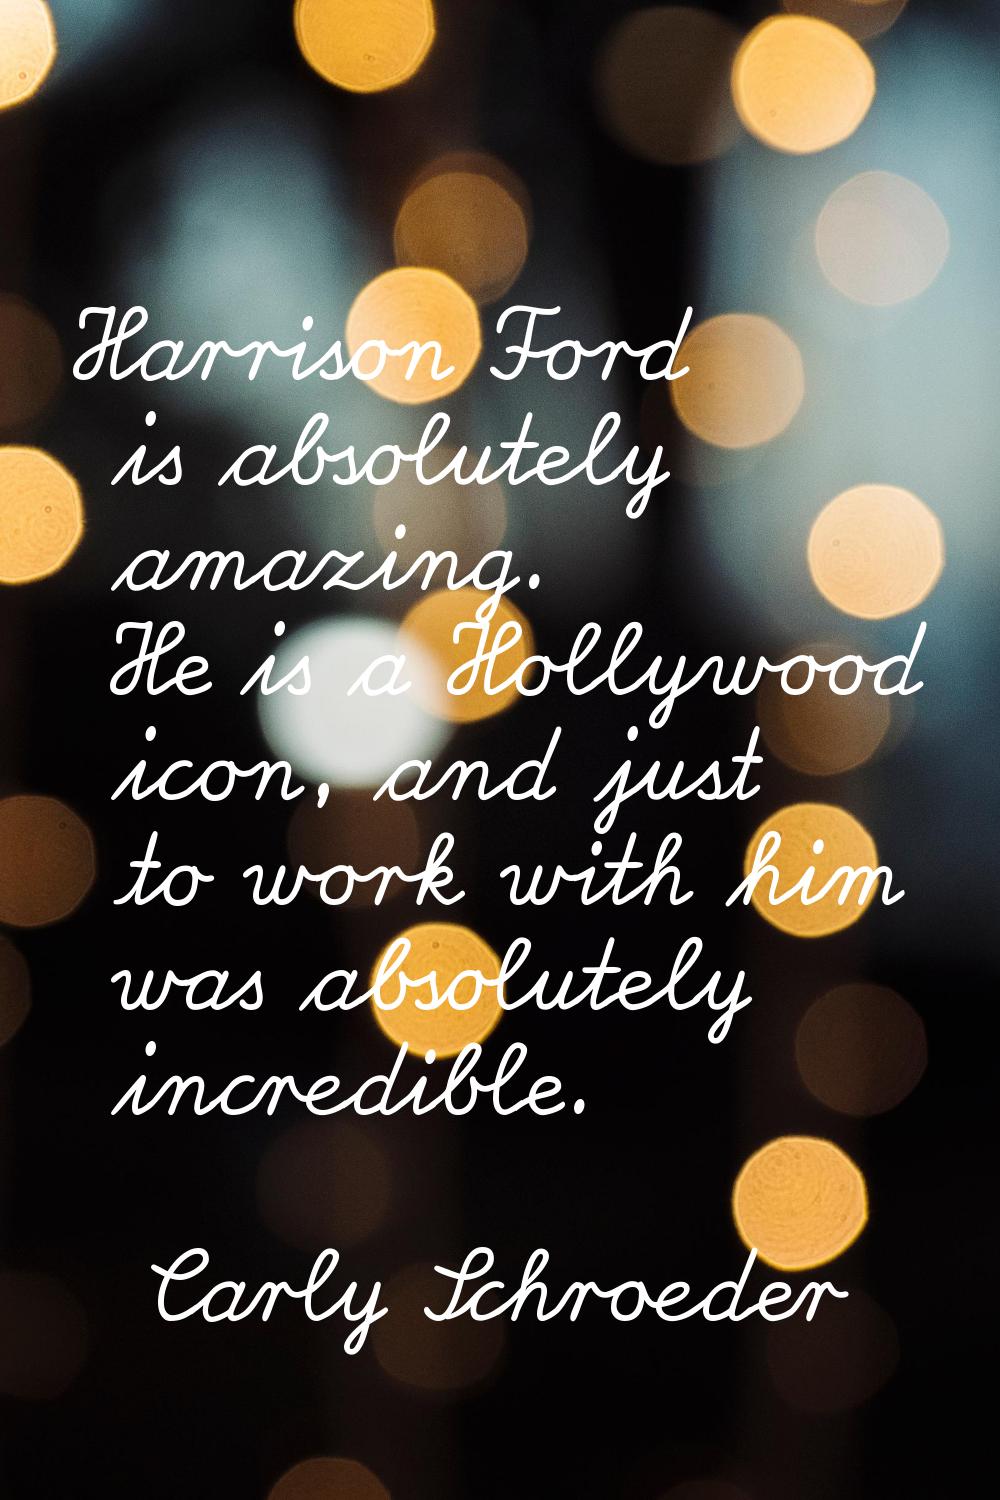 Harrison Ford is absolutely amazing. He is a Hollywood icon, and just to work with him was absolute